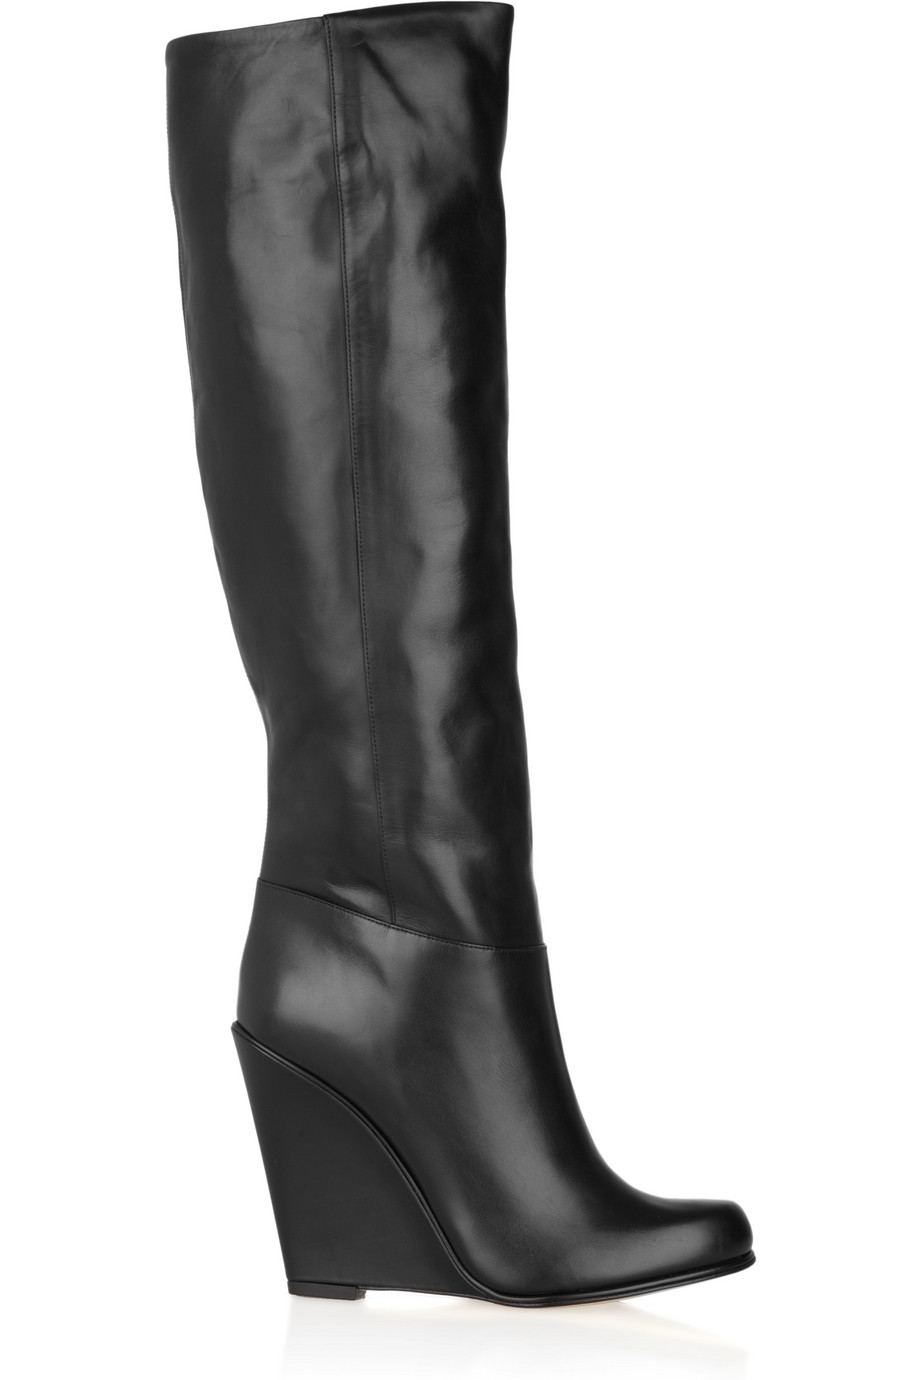 Lyst - Bally Deity Leather Wedge Knee Boots in Black